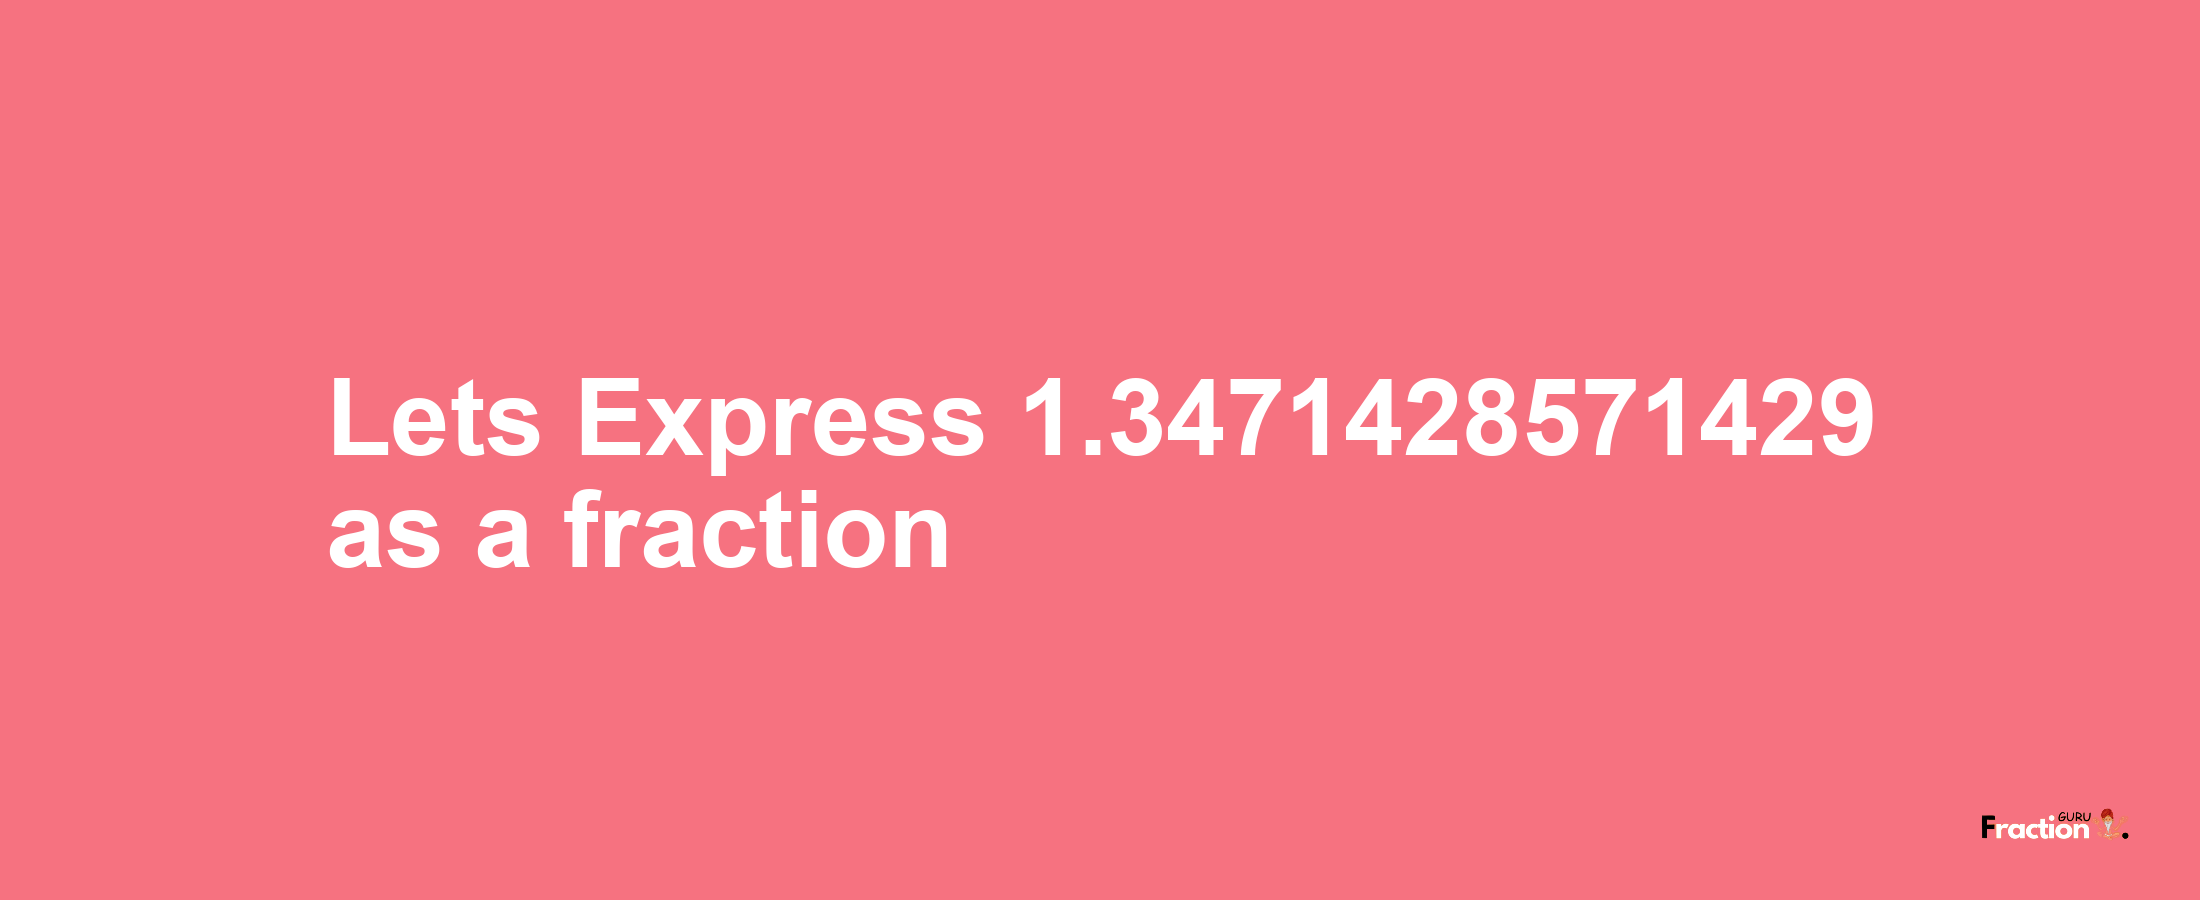 Lets Express 1.3471428571429 as afraction